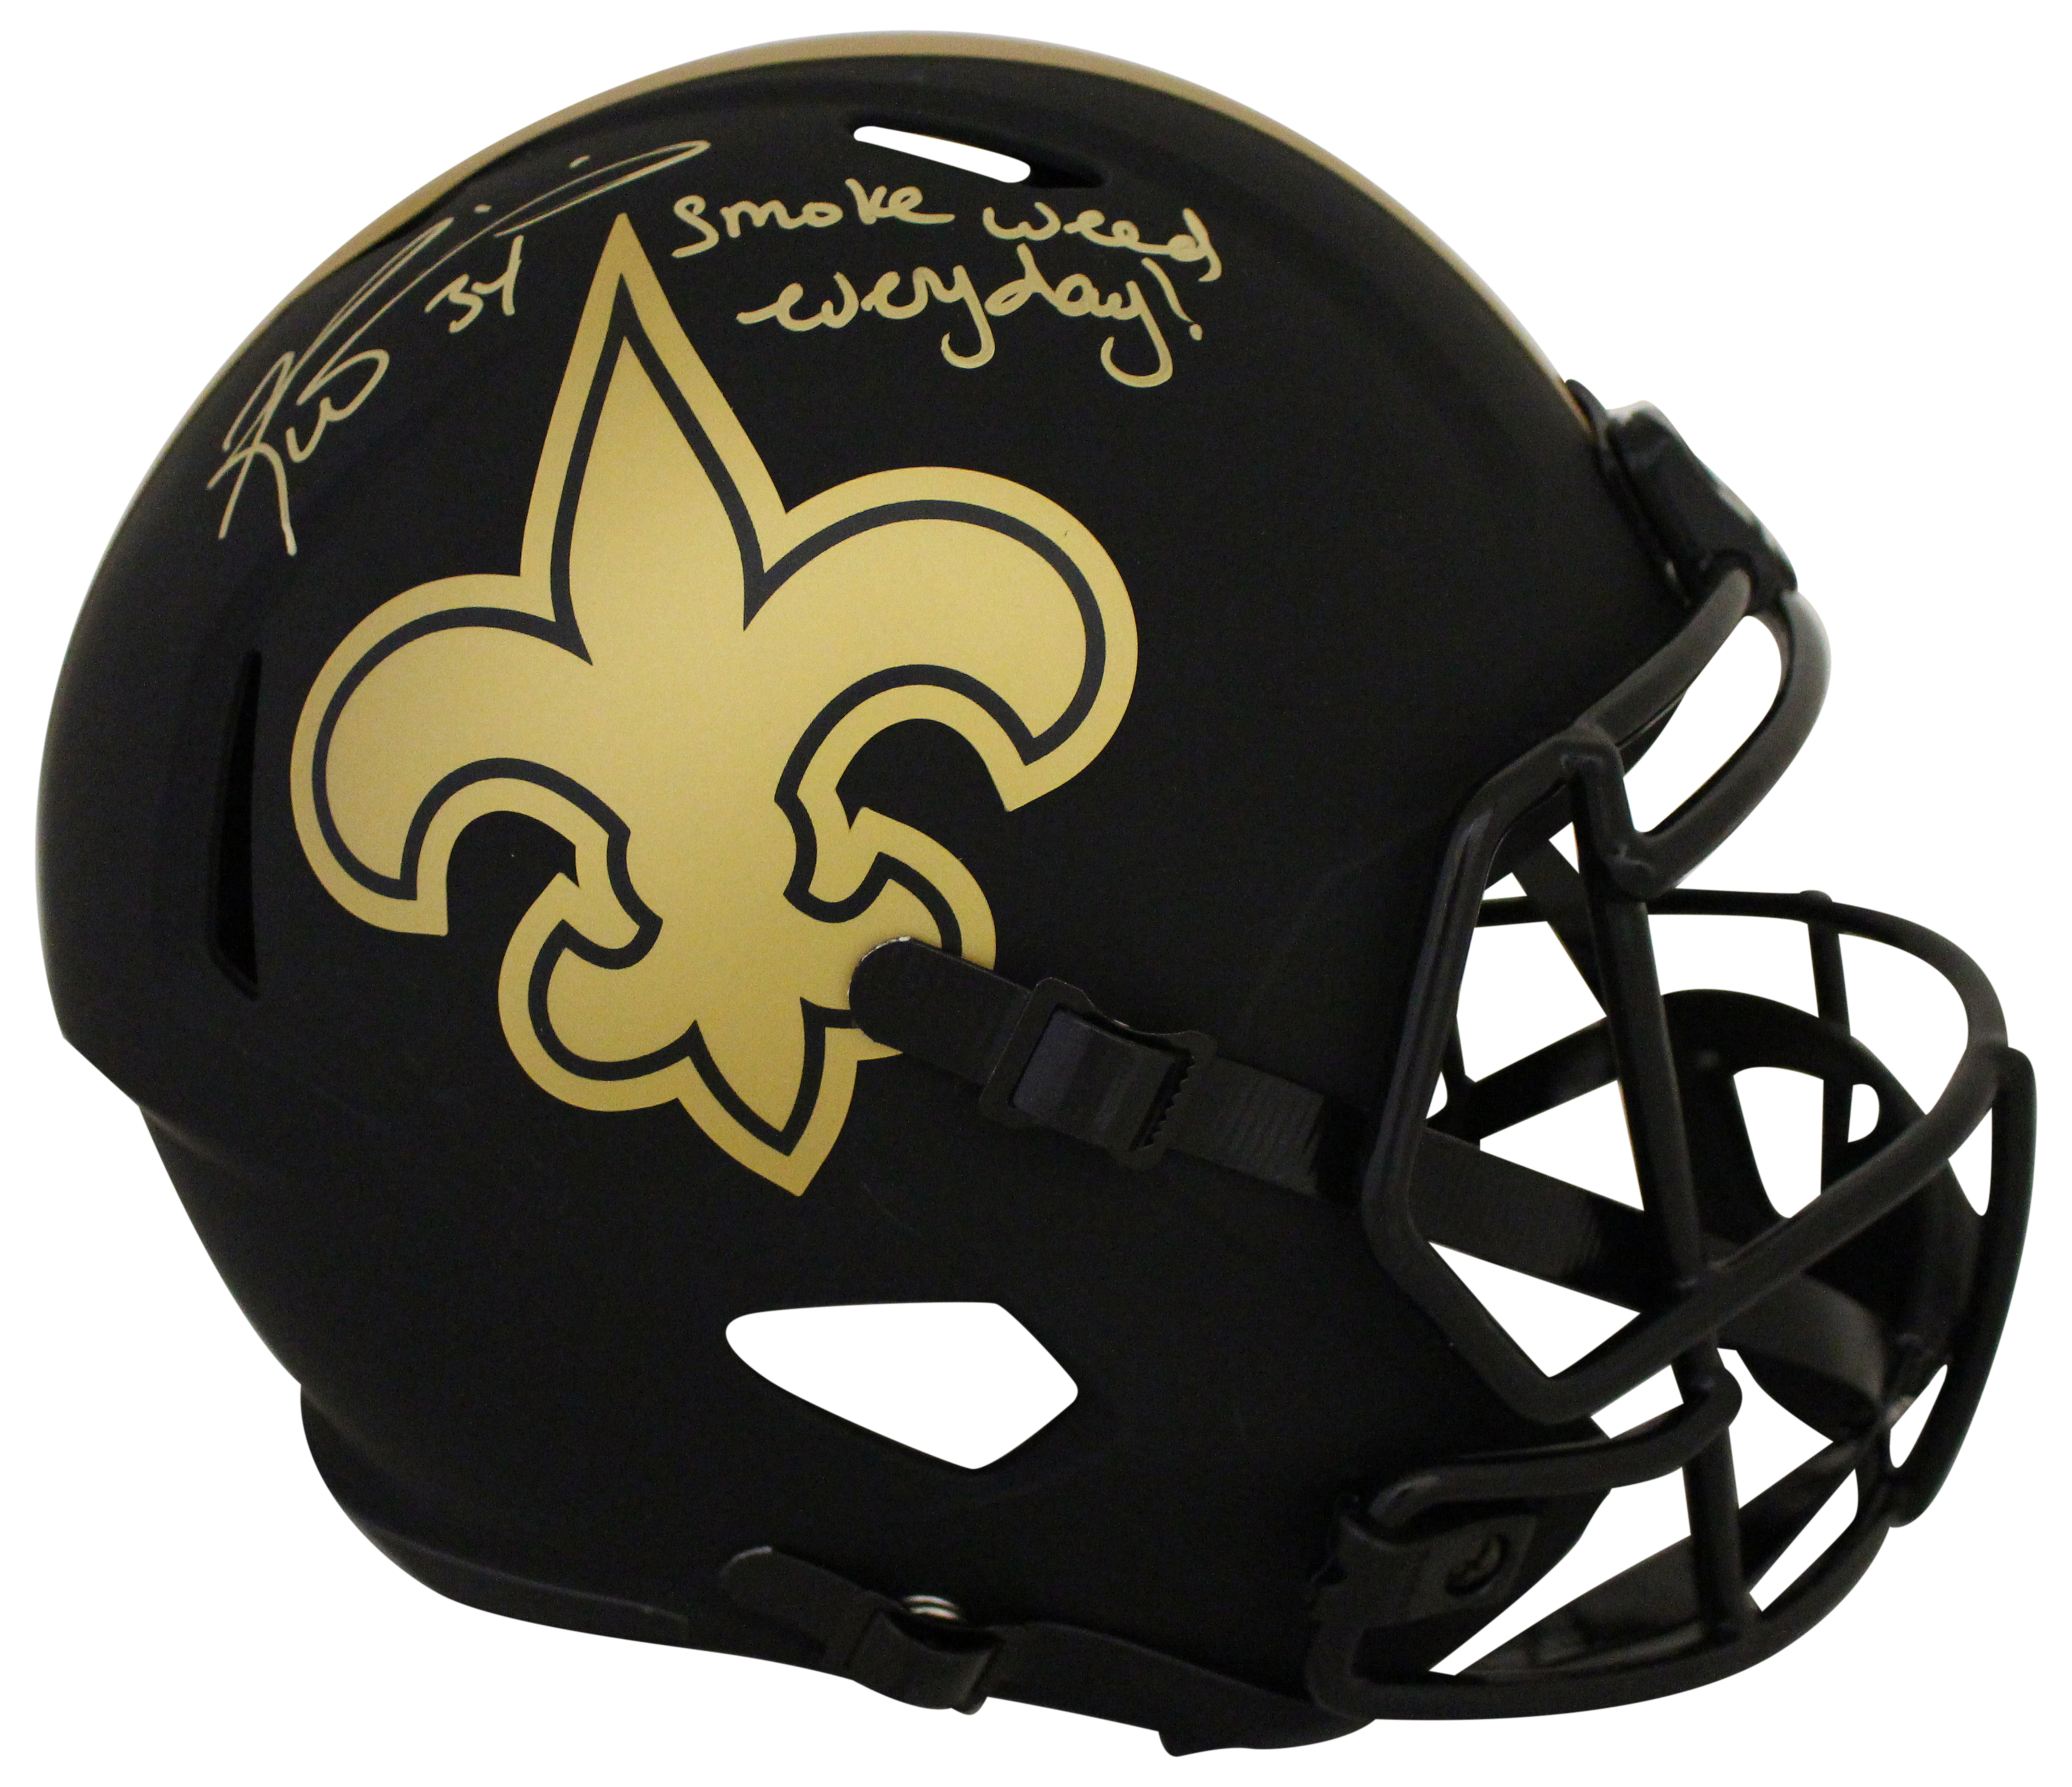 Ricky Williams Signed New Orleans Saints F/S Eclipse Helmet Weed BAS 28513